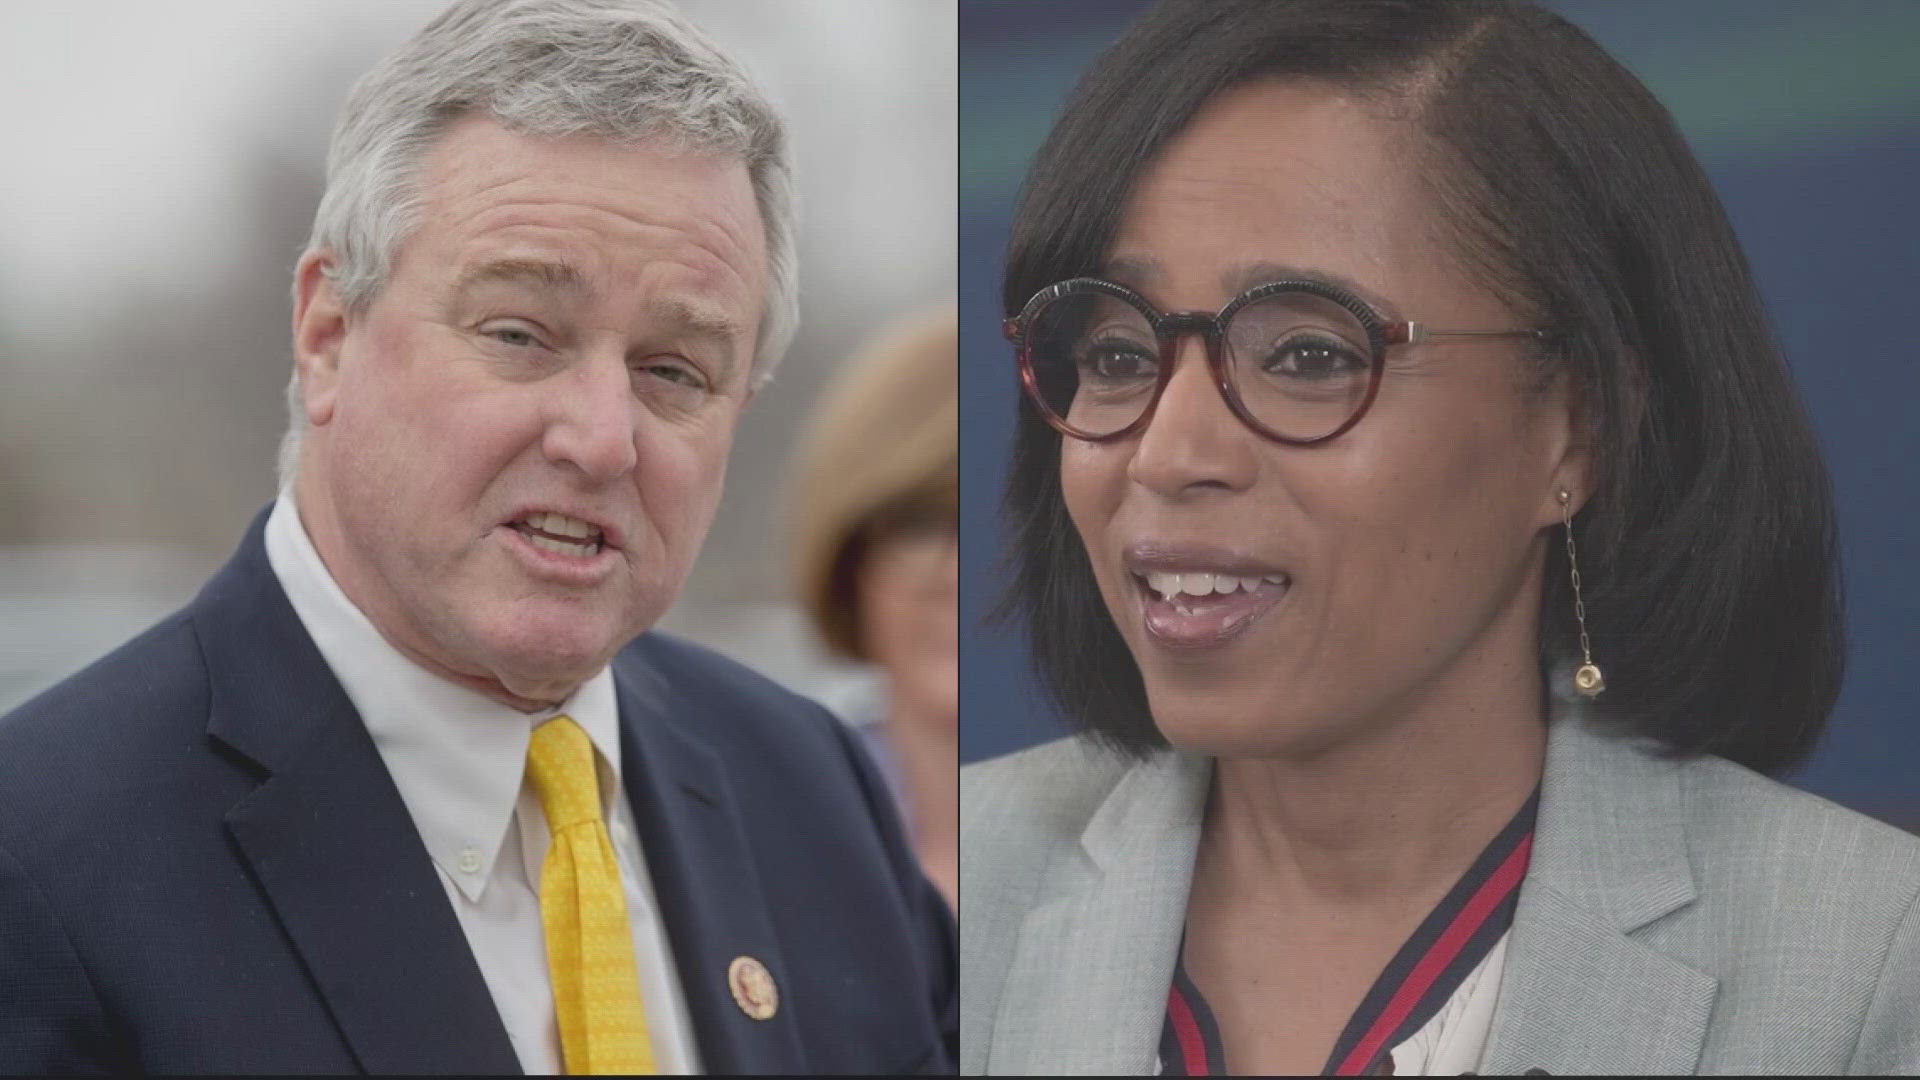 New polling, commissioned by David Trone, shows a double-digit lead over Angela Alsobrooks in the race to replace U.S. Sen. Ben Cardin (D-Maryland).